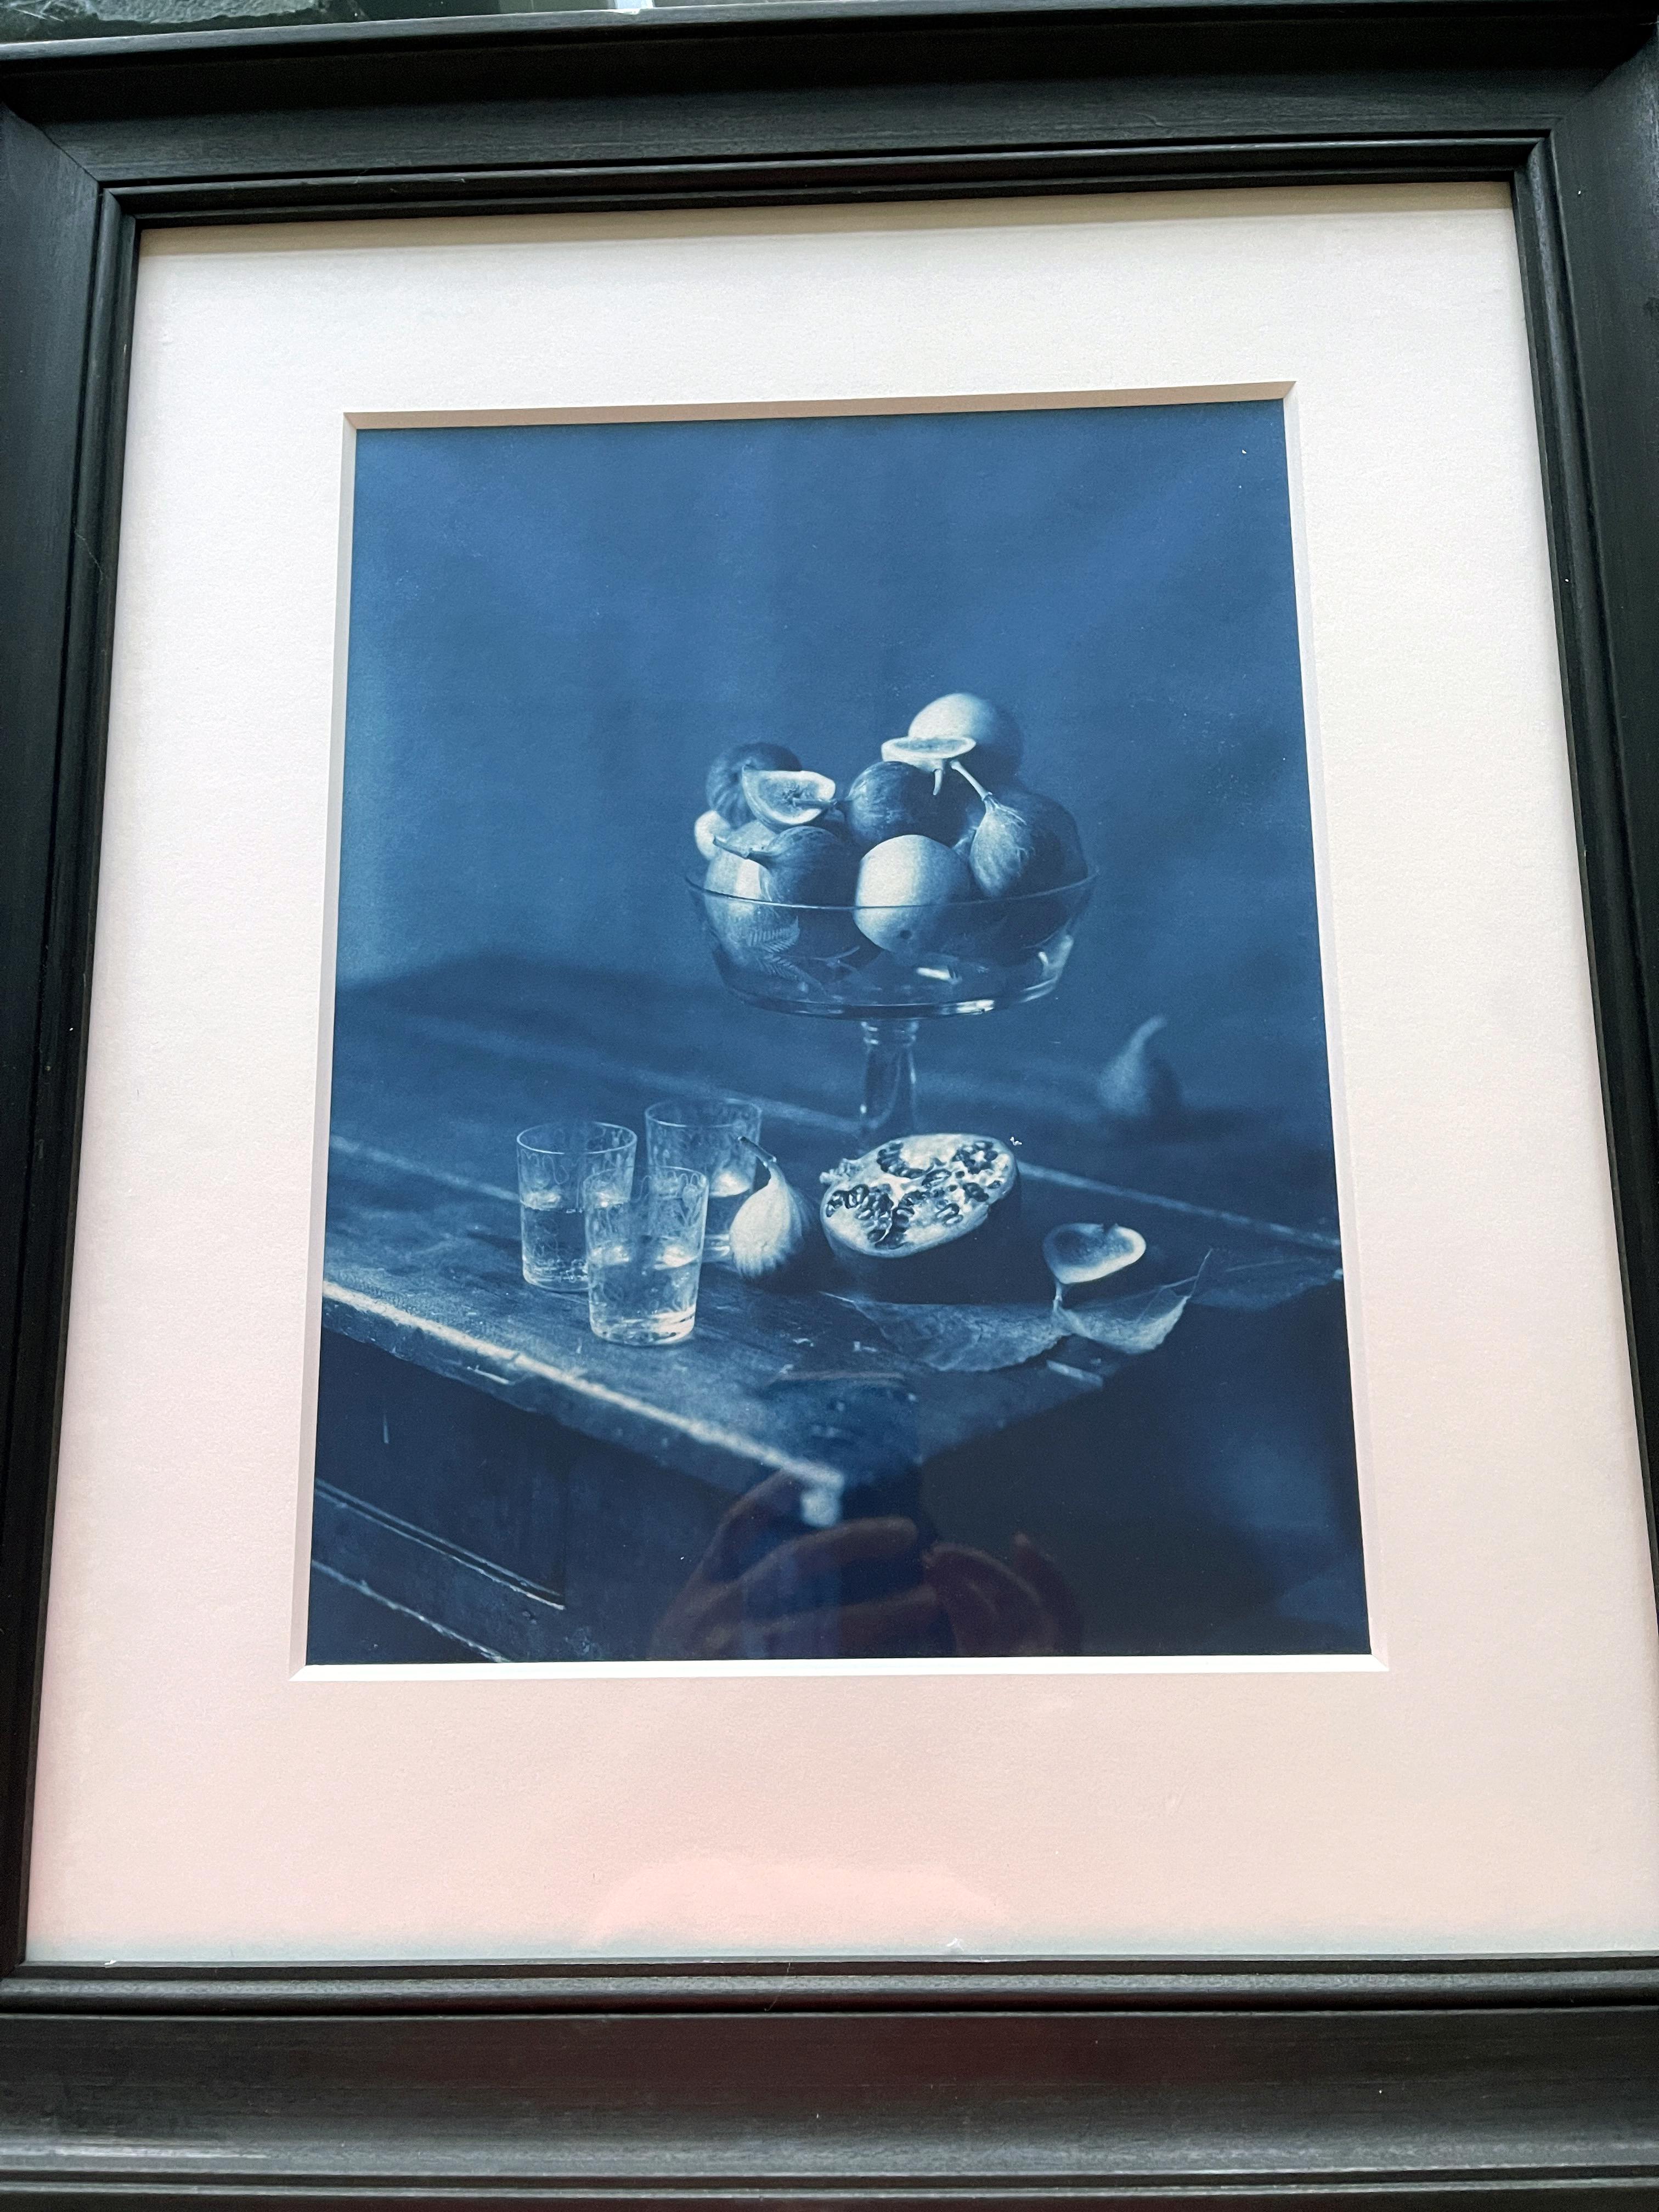 Modern Framed Editioned Cyanotype Photography by John Dugdale For Sale